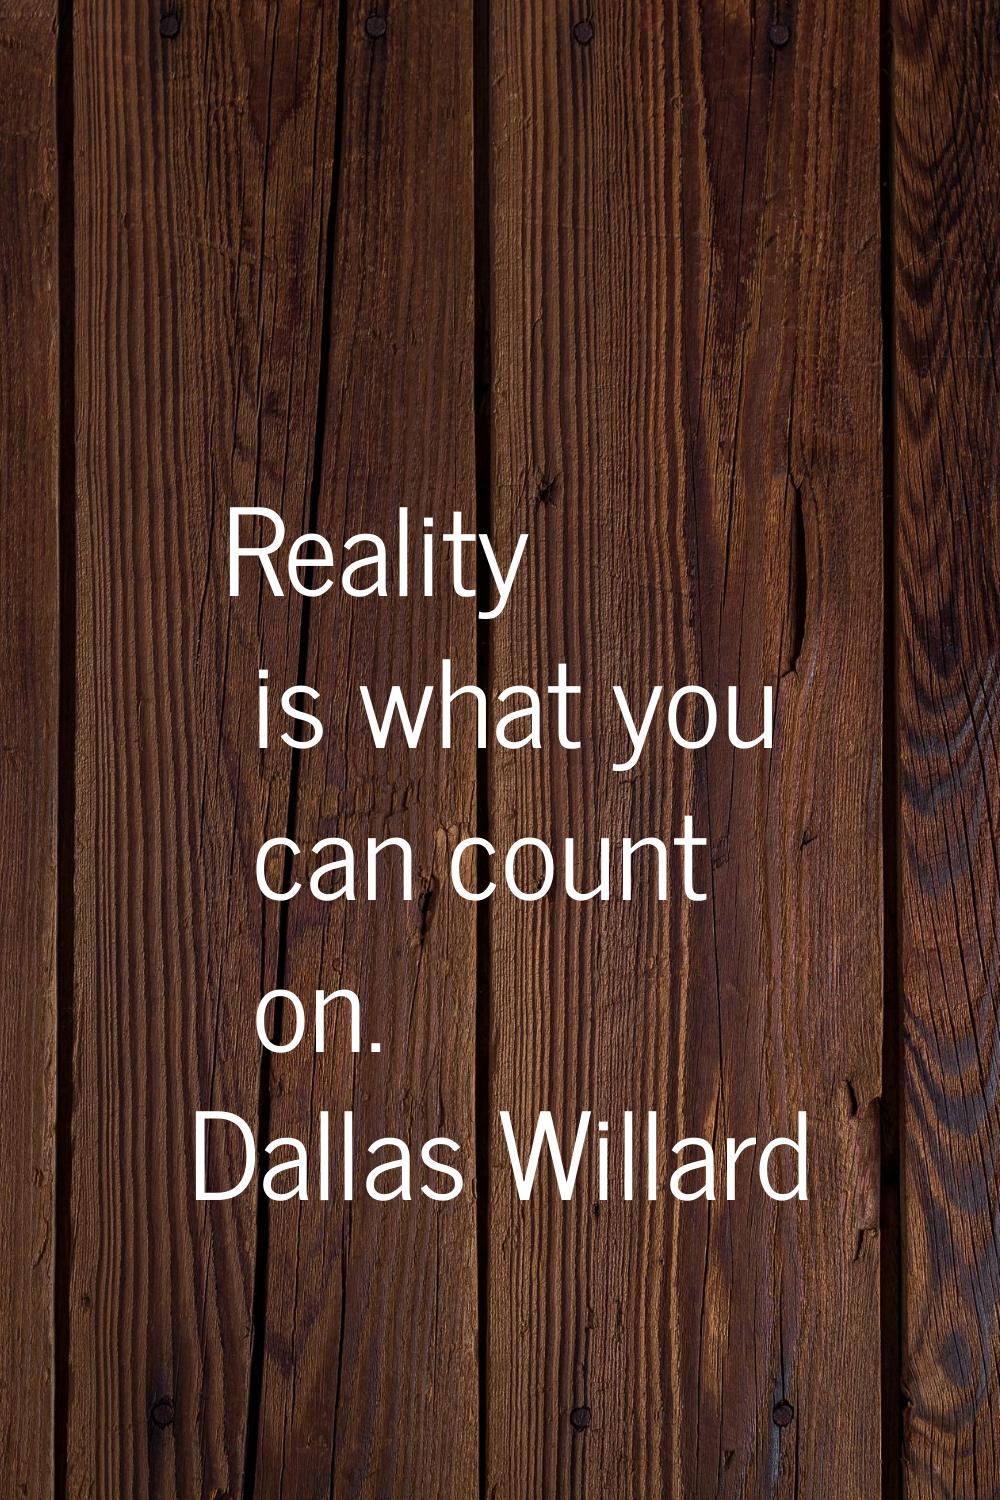 Reality is what you can count on.